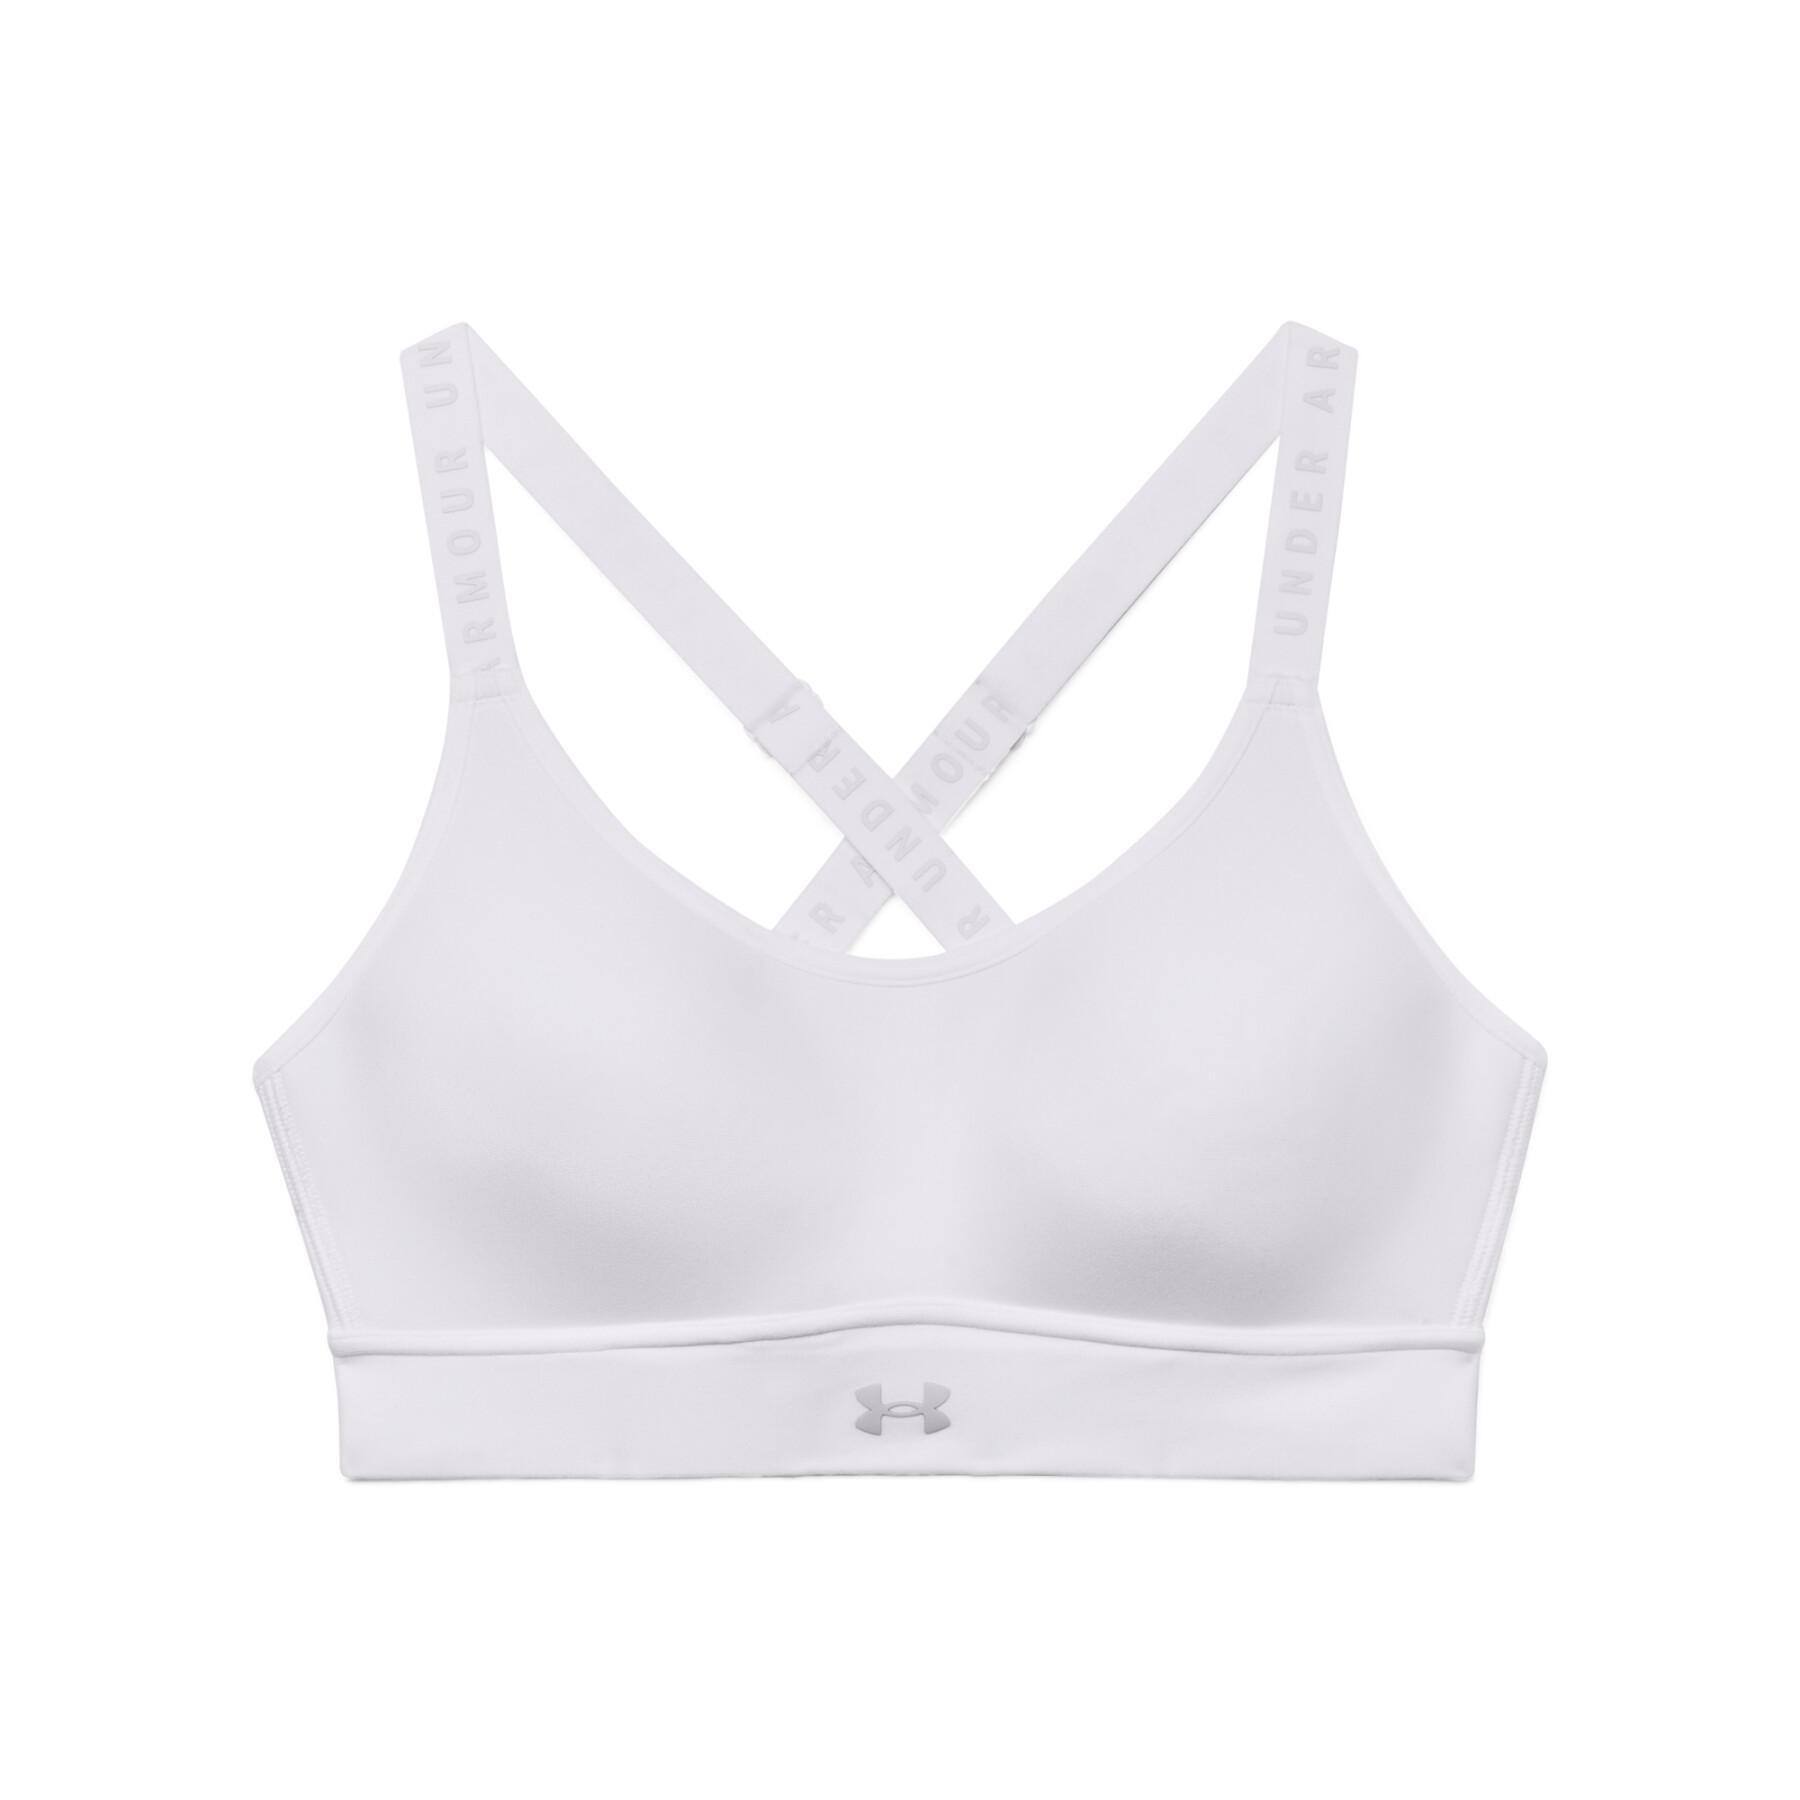 Moderate women's bra Under Armour Infinity covered impact